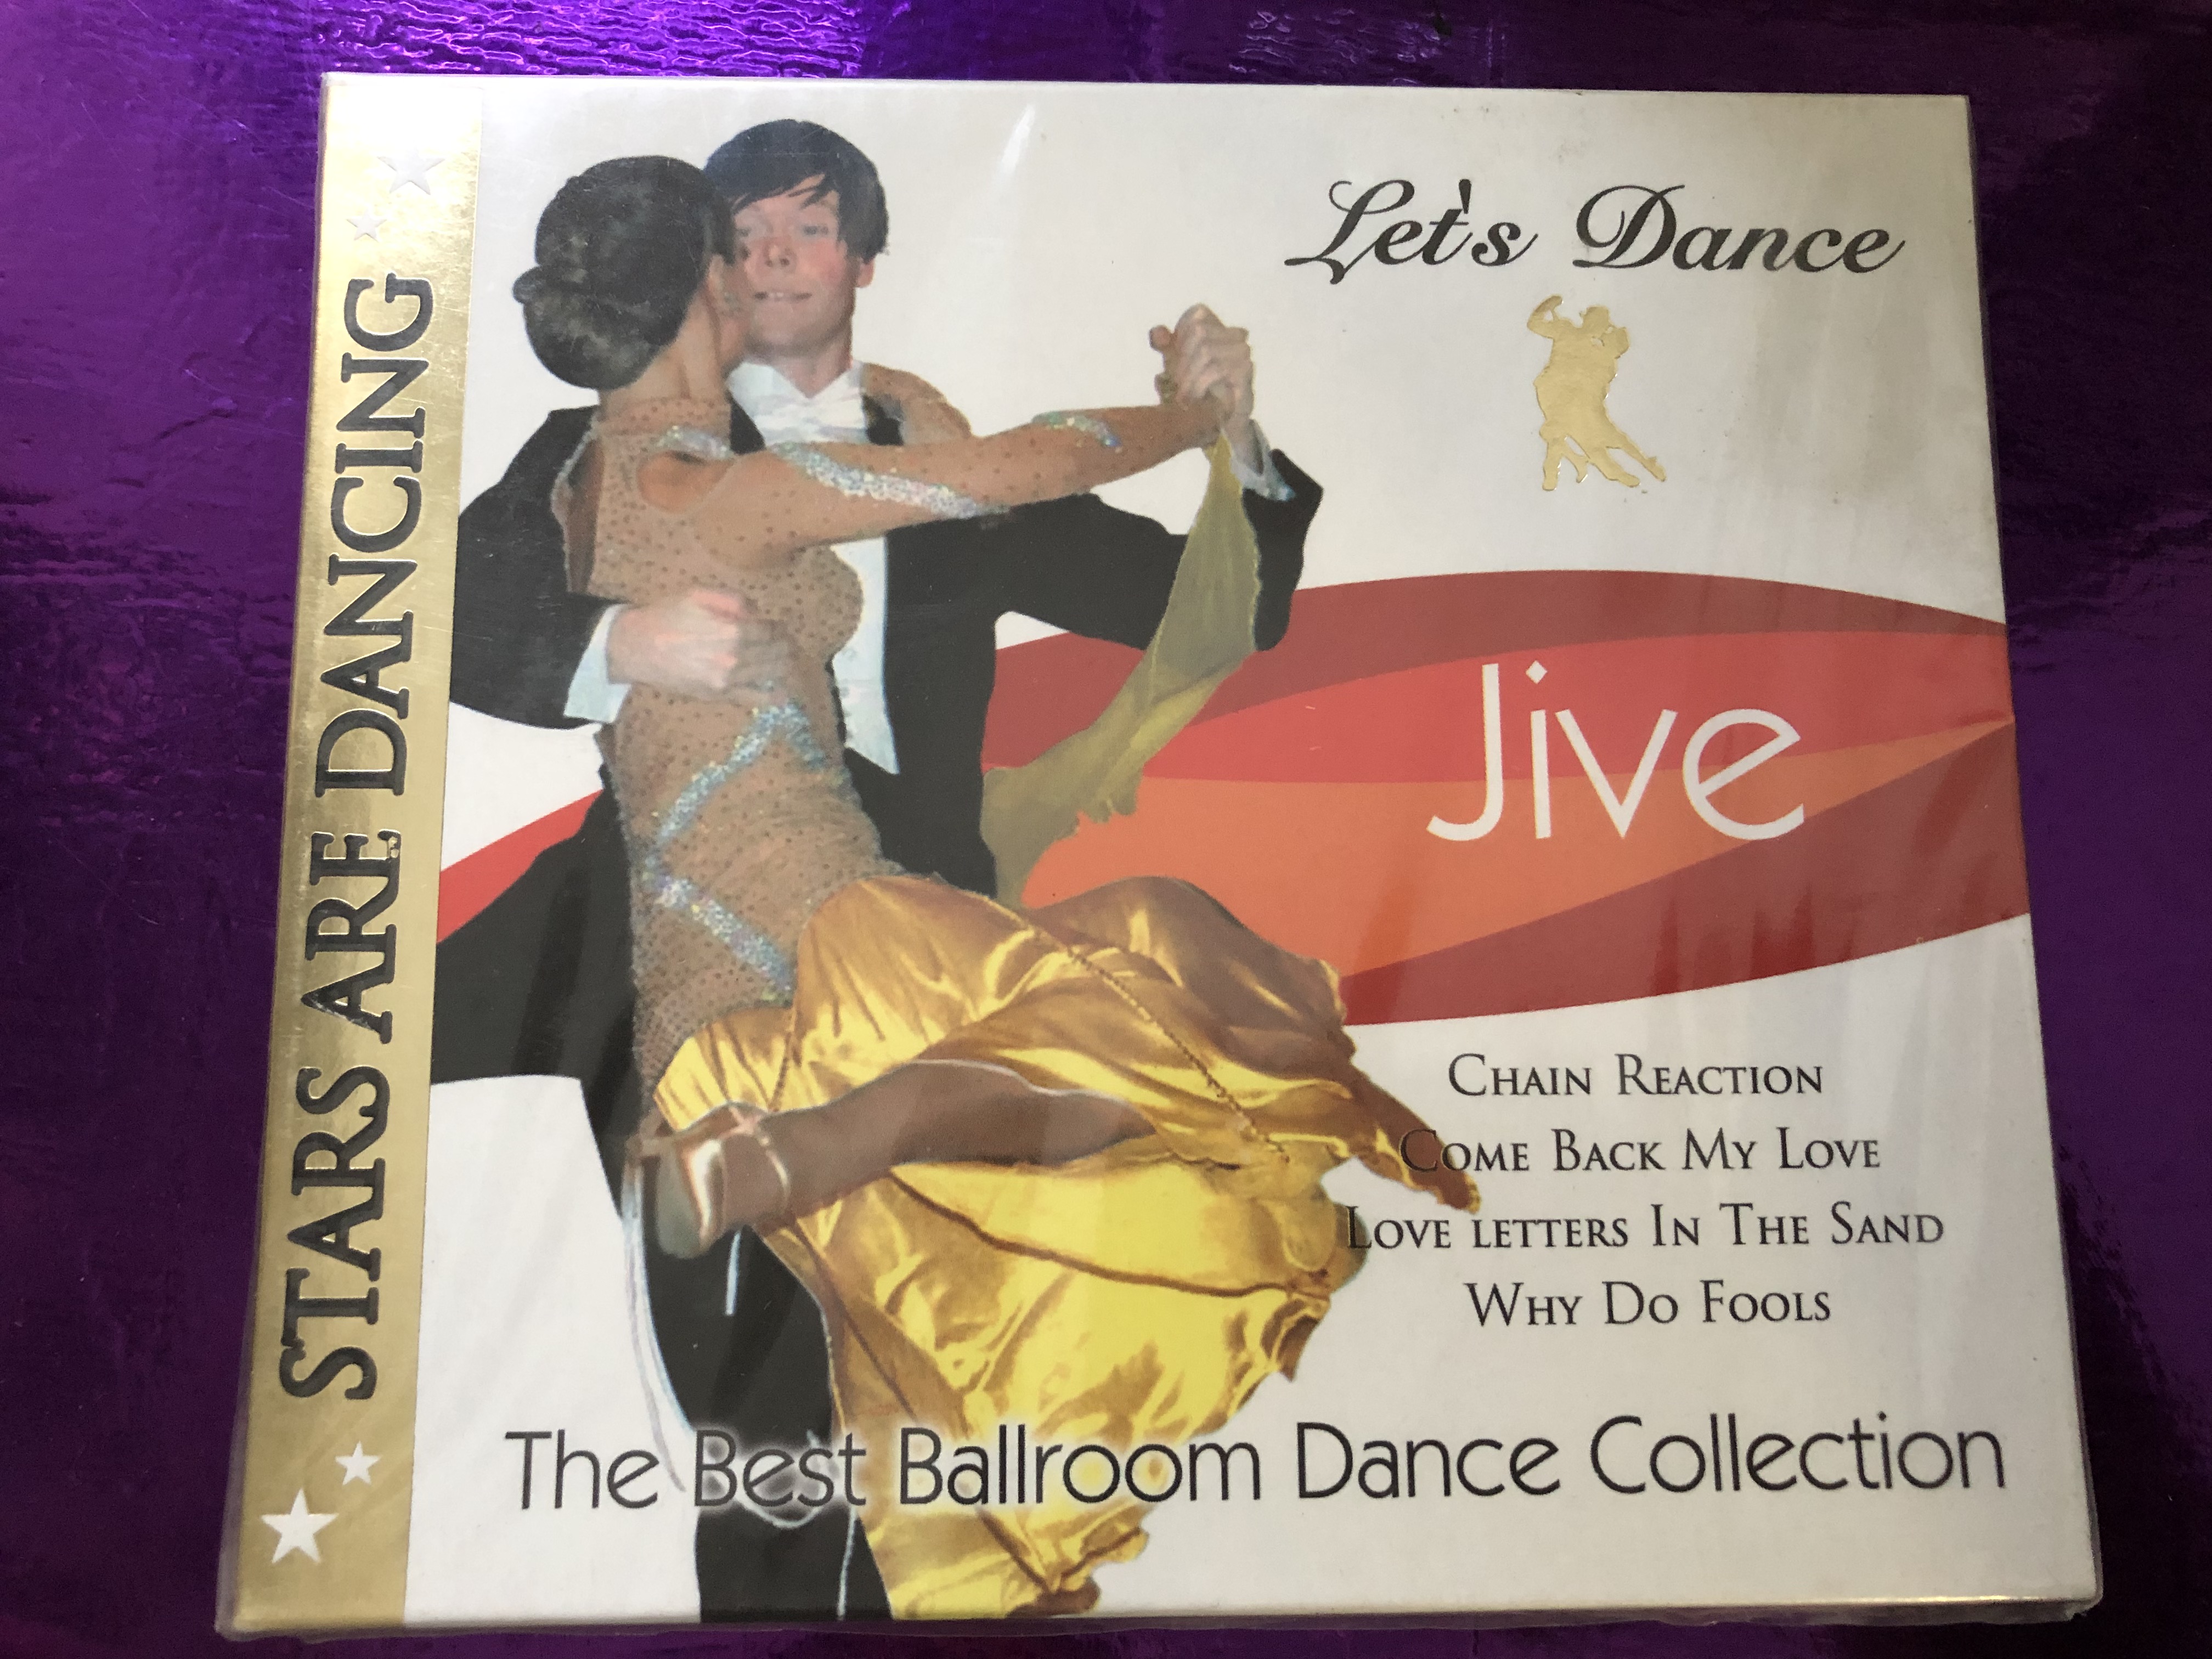 let-s-dance-stars-are-dancing-jive-the-best-ballroom-dance-collection-chain-reaction-come-back-me-love-love-letters-in-the-sand-why-do-fools-lmm-audio-cd-2006-2048112-1-.jpg